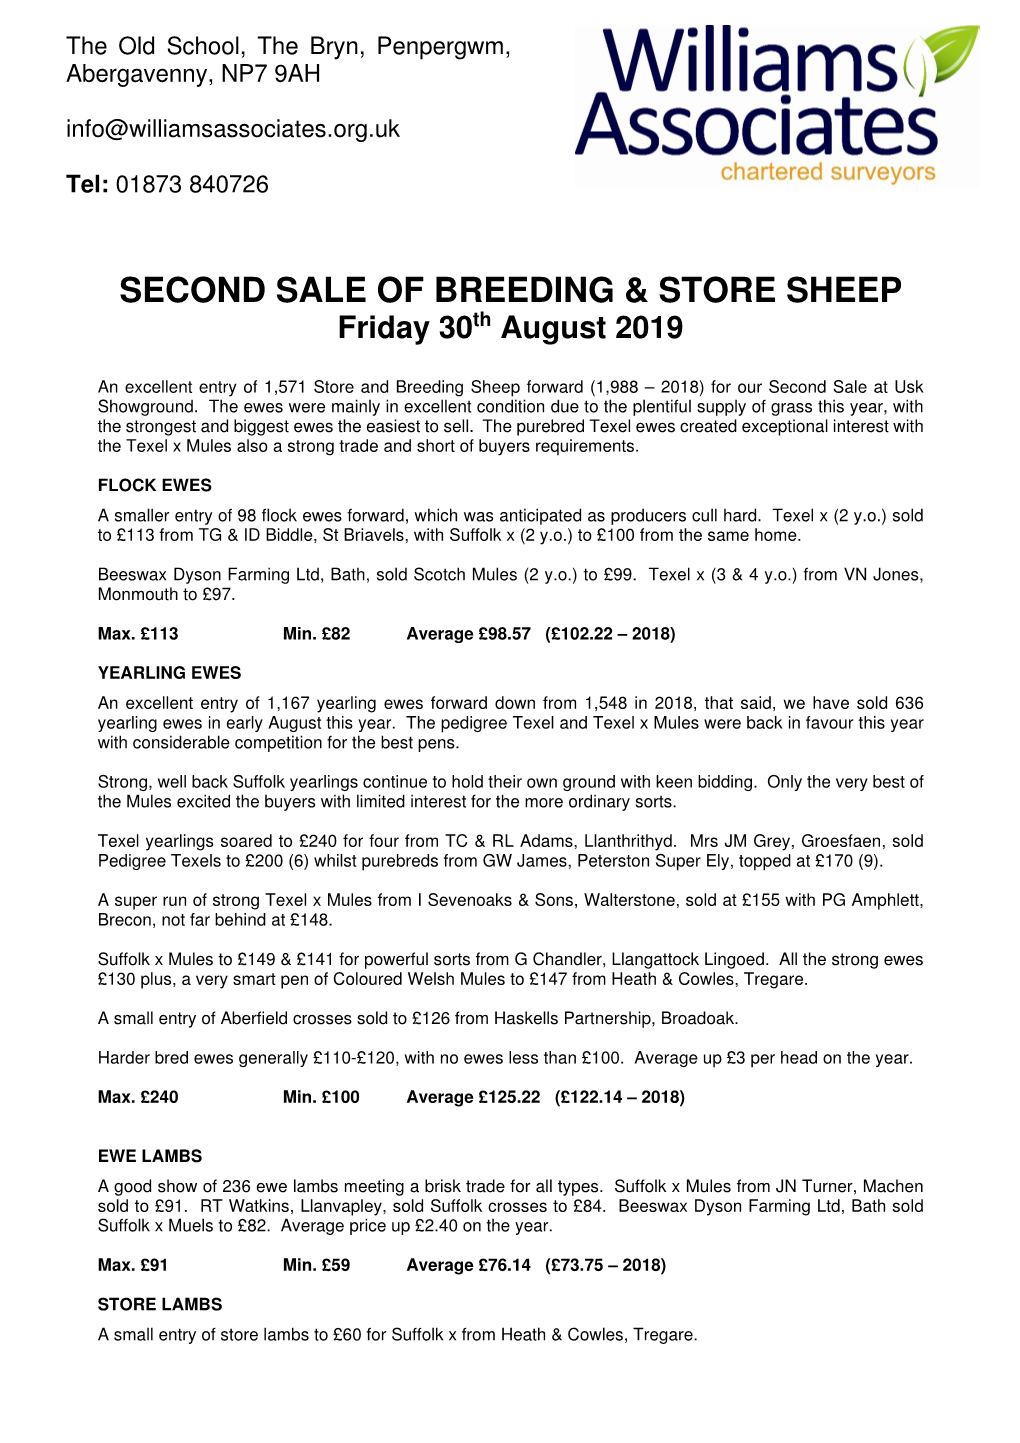 Second Sale of Breeding & Store Sheep